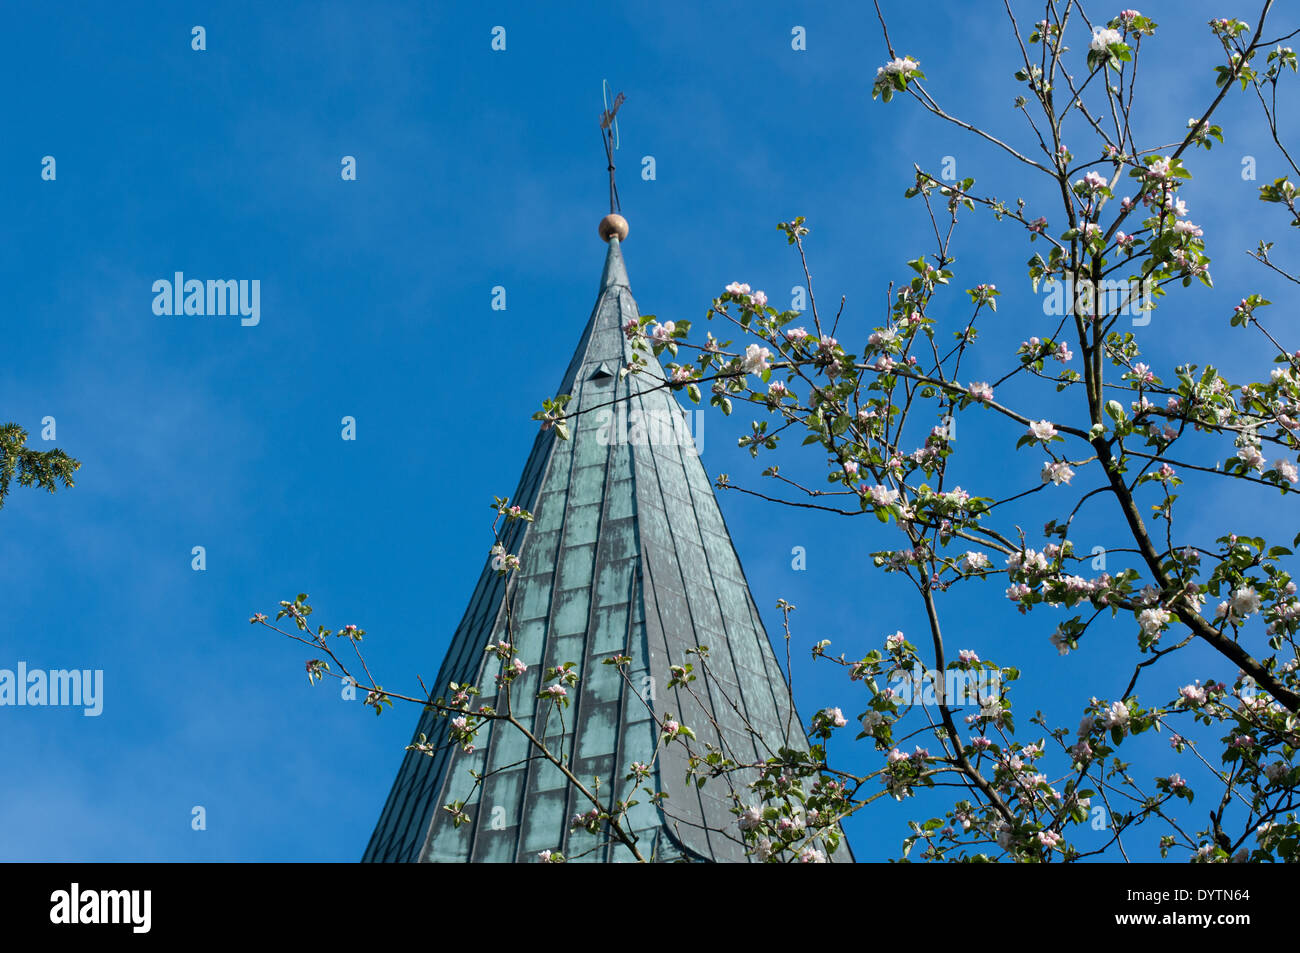 Apple tree blossoms in front of church steeple at a sunny day with blue sky in Bippen, Lower Saxony, Germany. Stock Photo